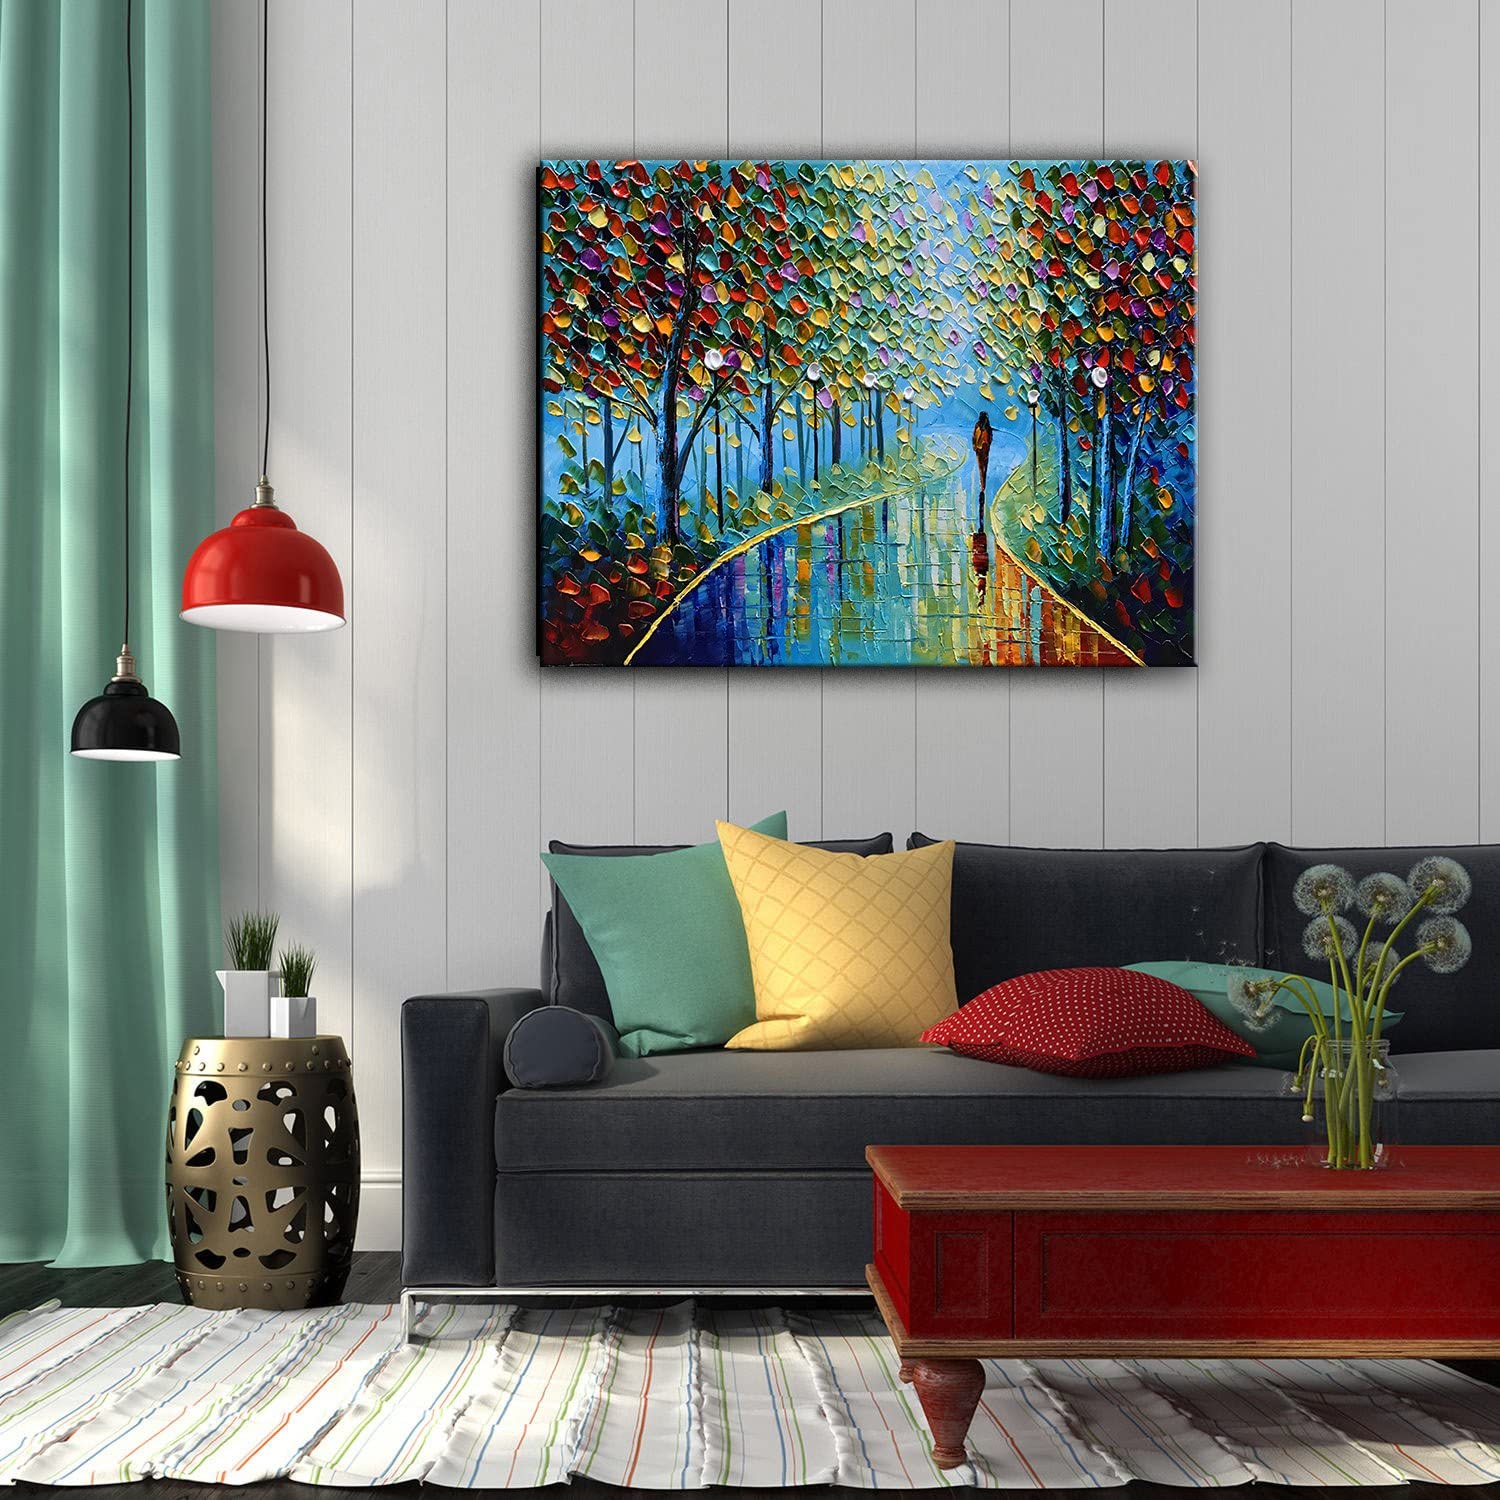  JELRINR Autumn landscape Oil Painting On Canvas Palette Knife  Texture Contemporary landscape Art paintings Hand painted Acrylic paintings  Home living Room Office Decor Canvas Wall Art 24x48inch: Paintings